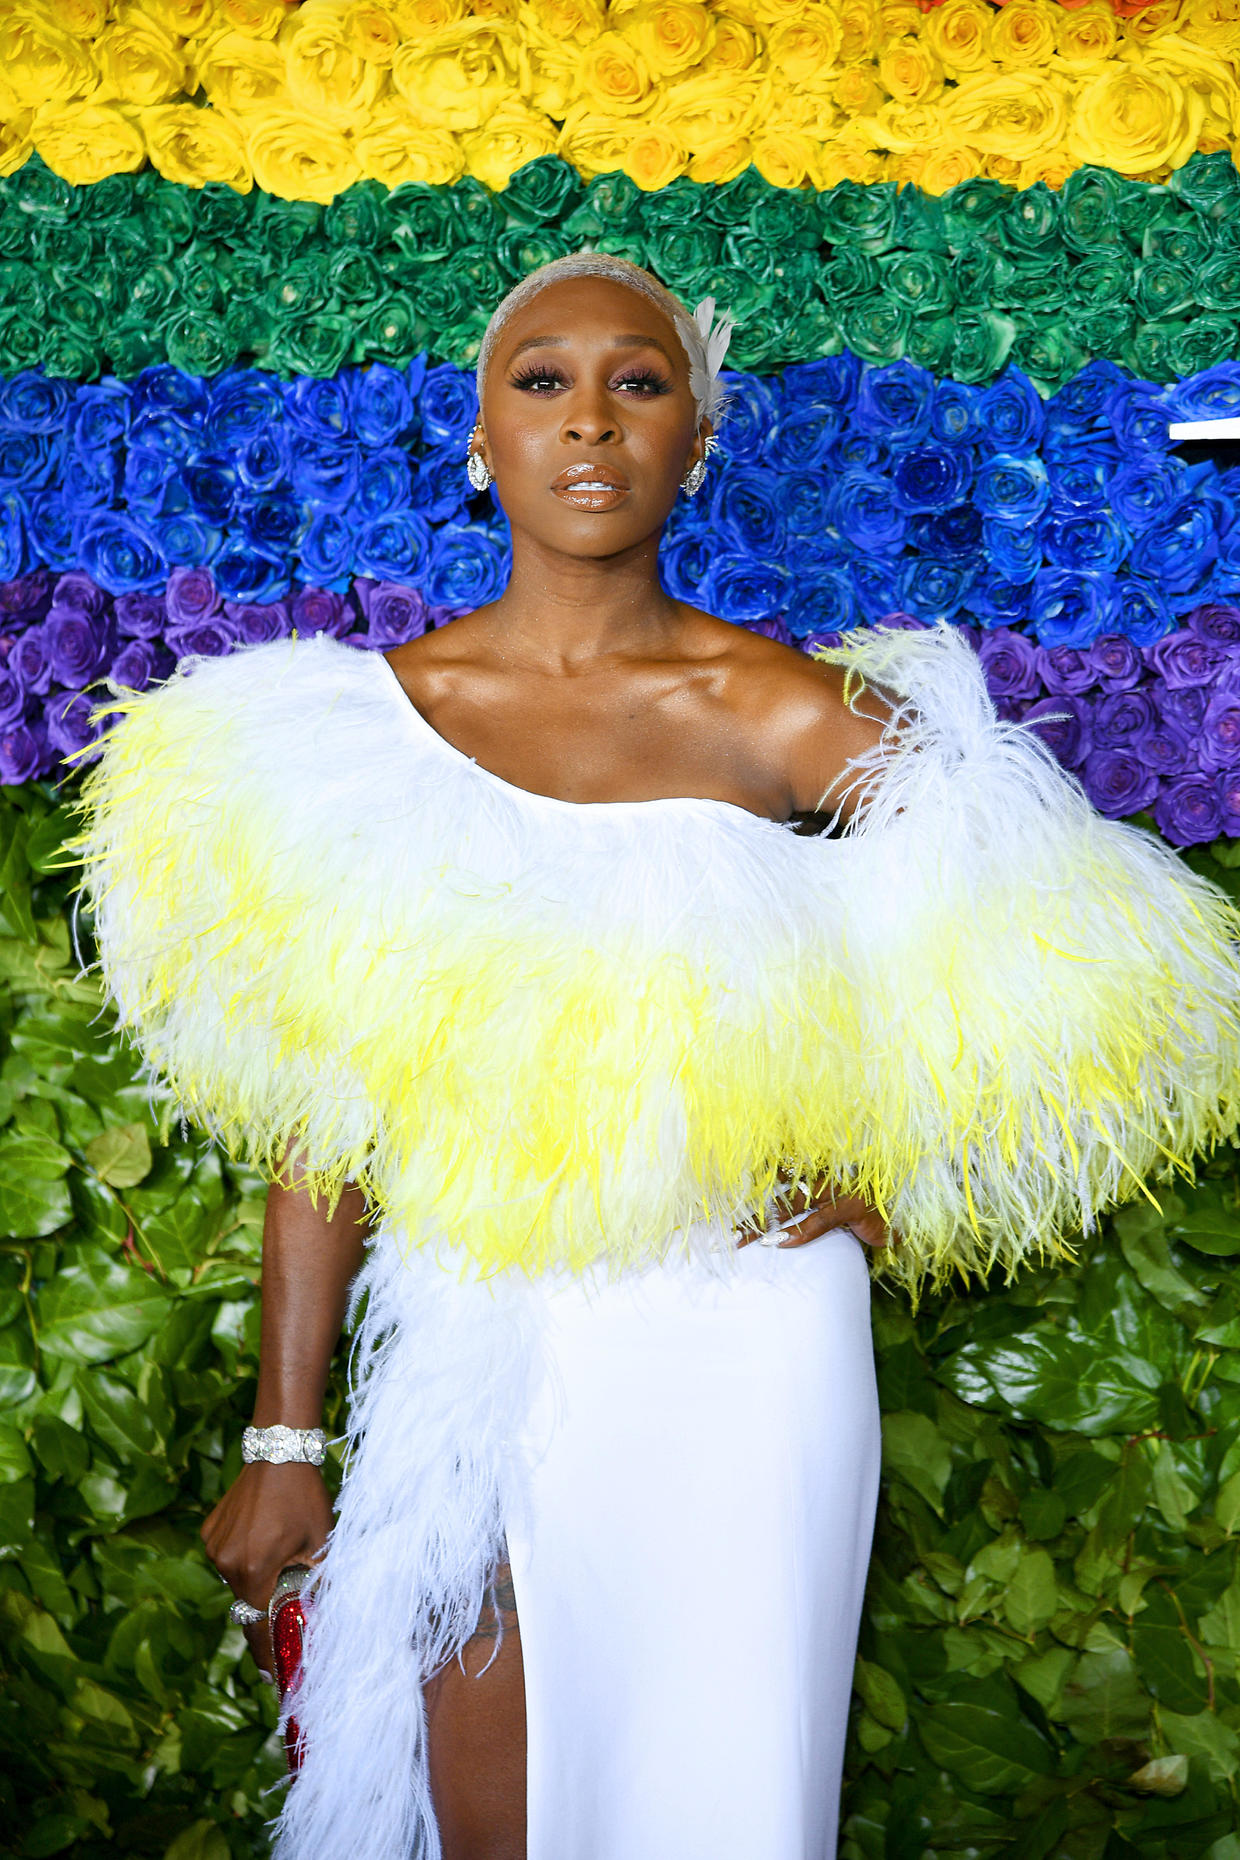 Tony Awards 2019: Red carpet looks from your favorite stars